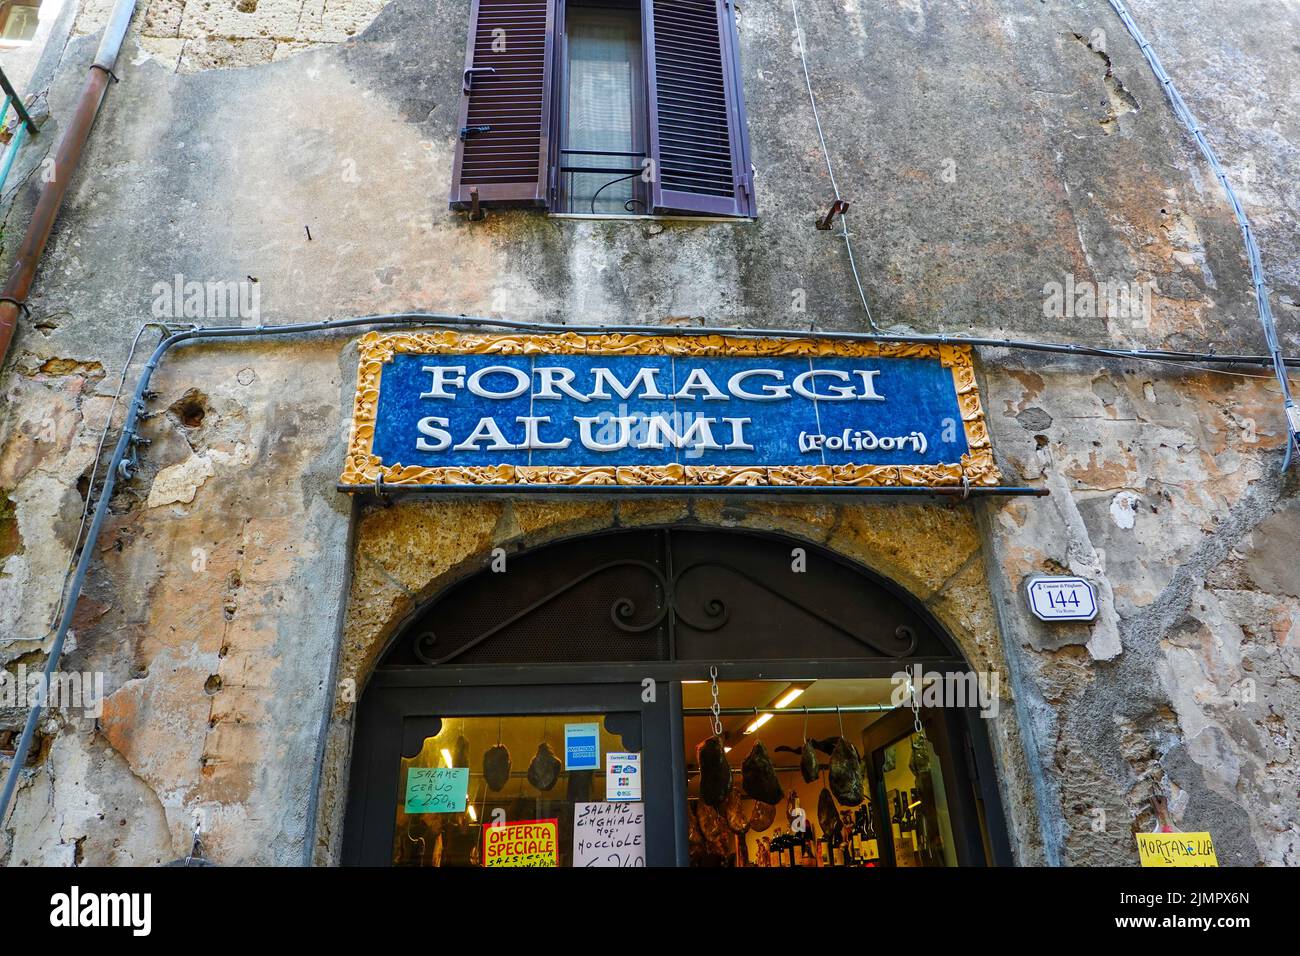 Entrance to a cheese and cured meats shop located in the Tuscan hill town of Pitigliano in the Province of Grosetto, Italy. Stock Photo